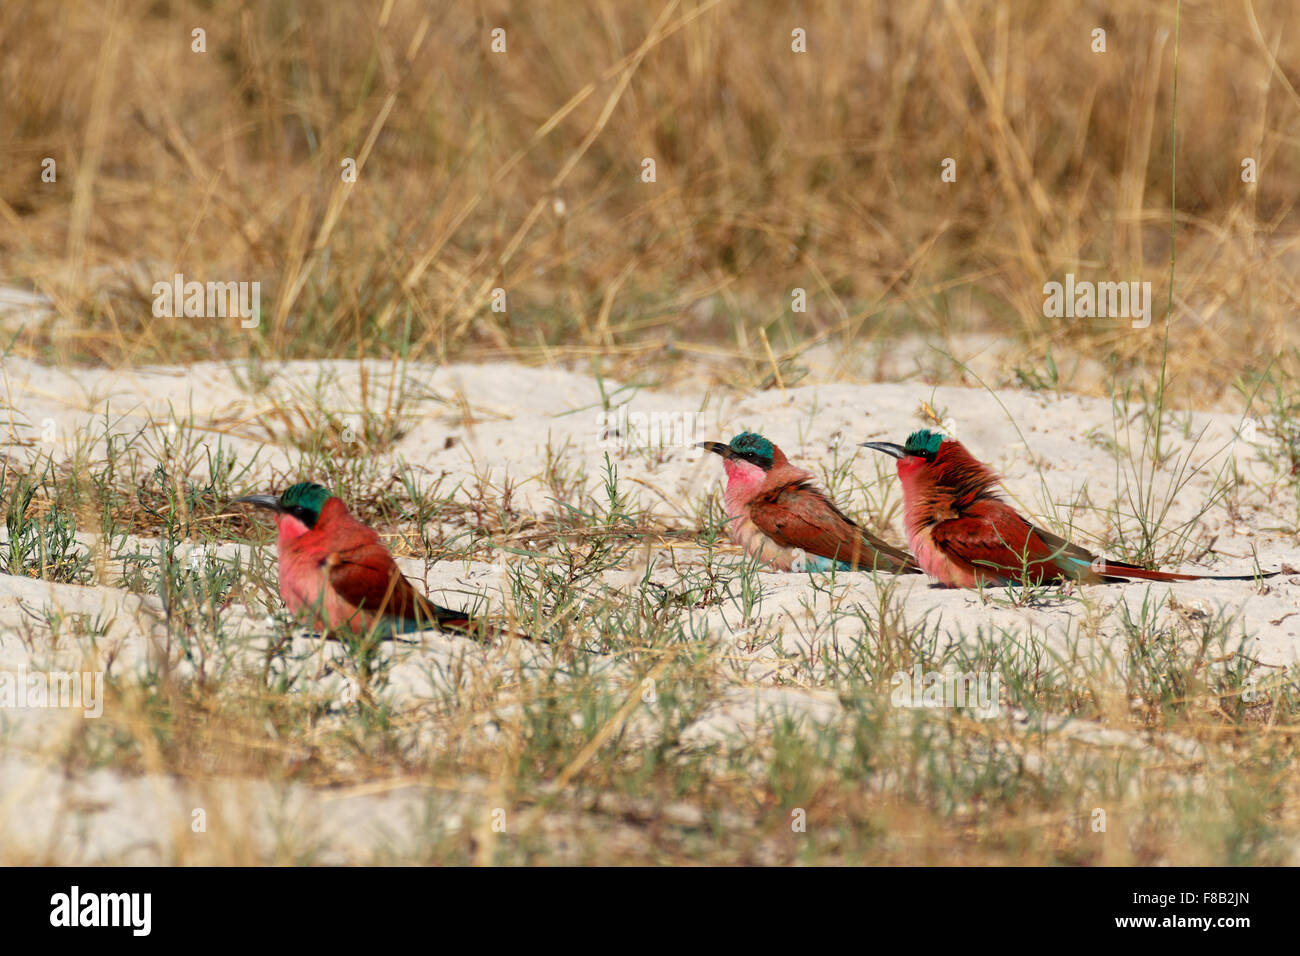 large nesting colony of Nothern Carmine Bee-eater (Merops nubicoides) on bank of the Zambezi river in Caprivi Namibia, Africa Stock Photo